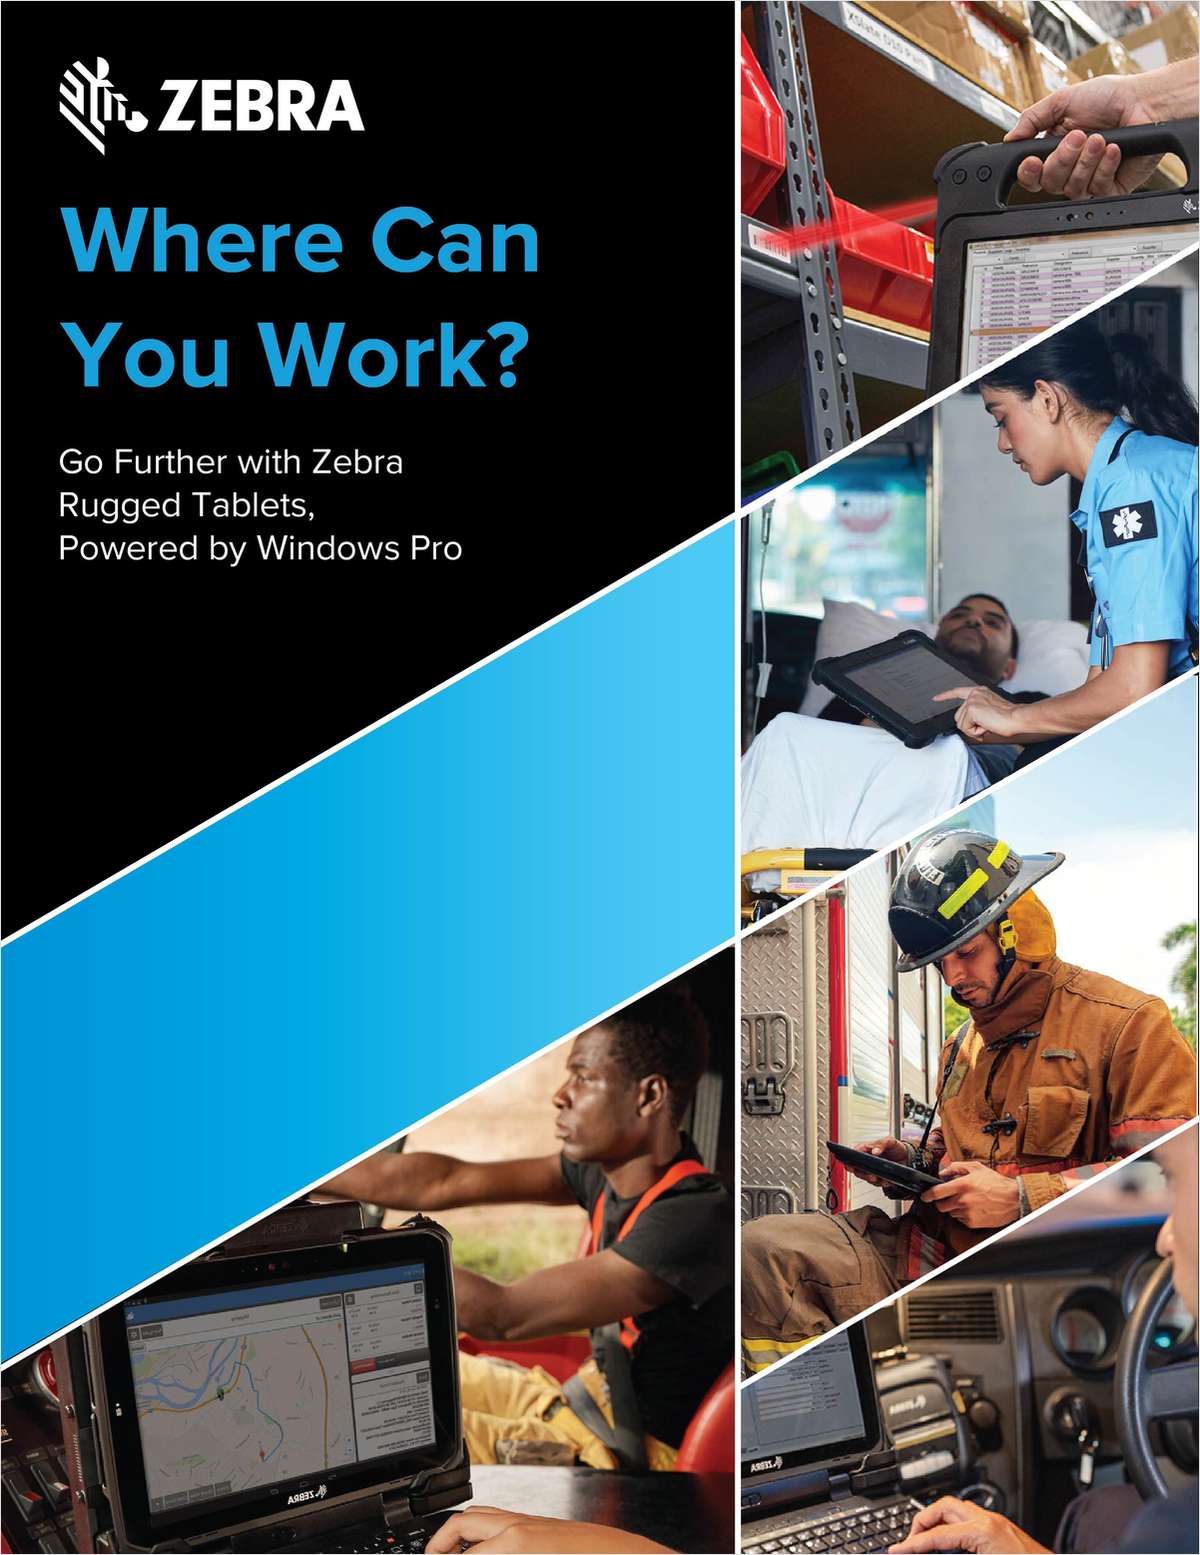 Where Can You Work?  Go Further with Zebra Rugged Tablets, Powered by Windows Pro